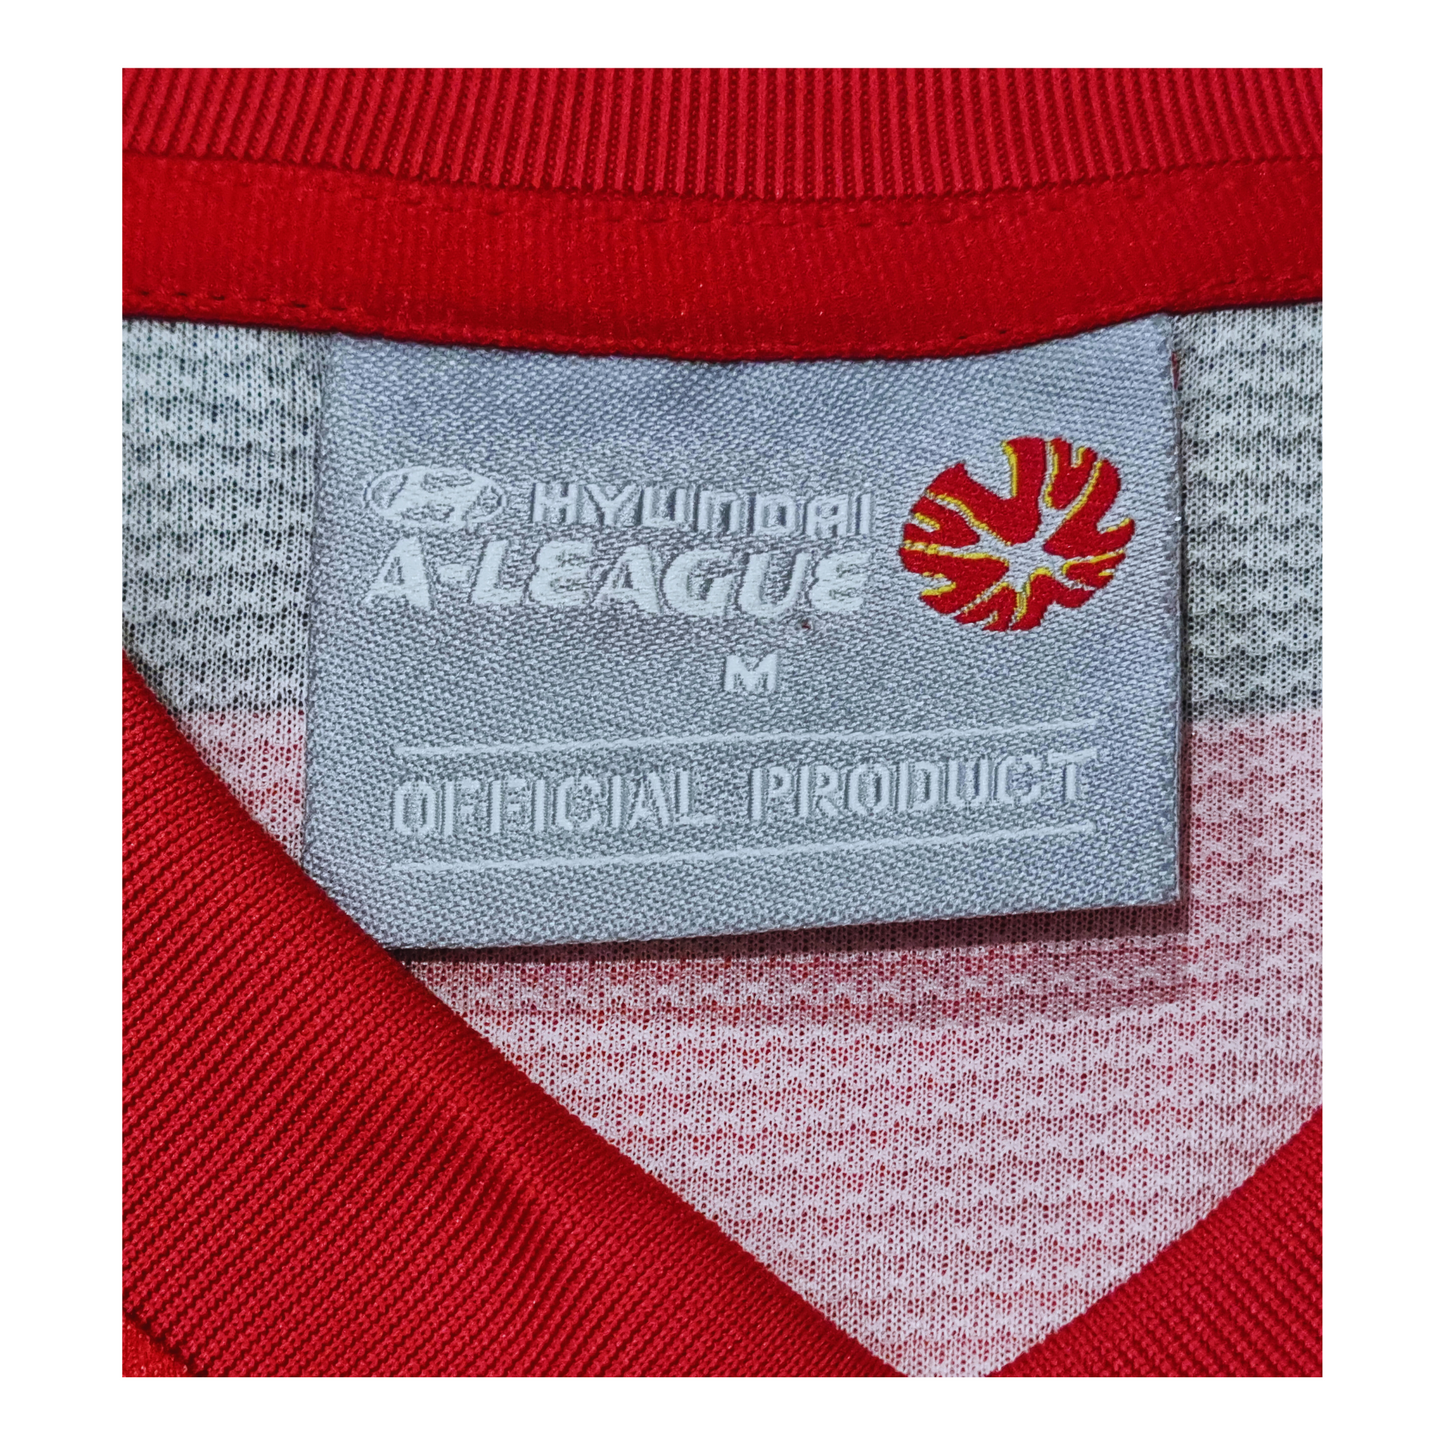 A red shirt with a label that says Western Sydney Wanderers 2013/14 Home Jersey by Nike.